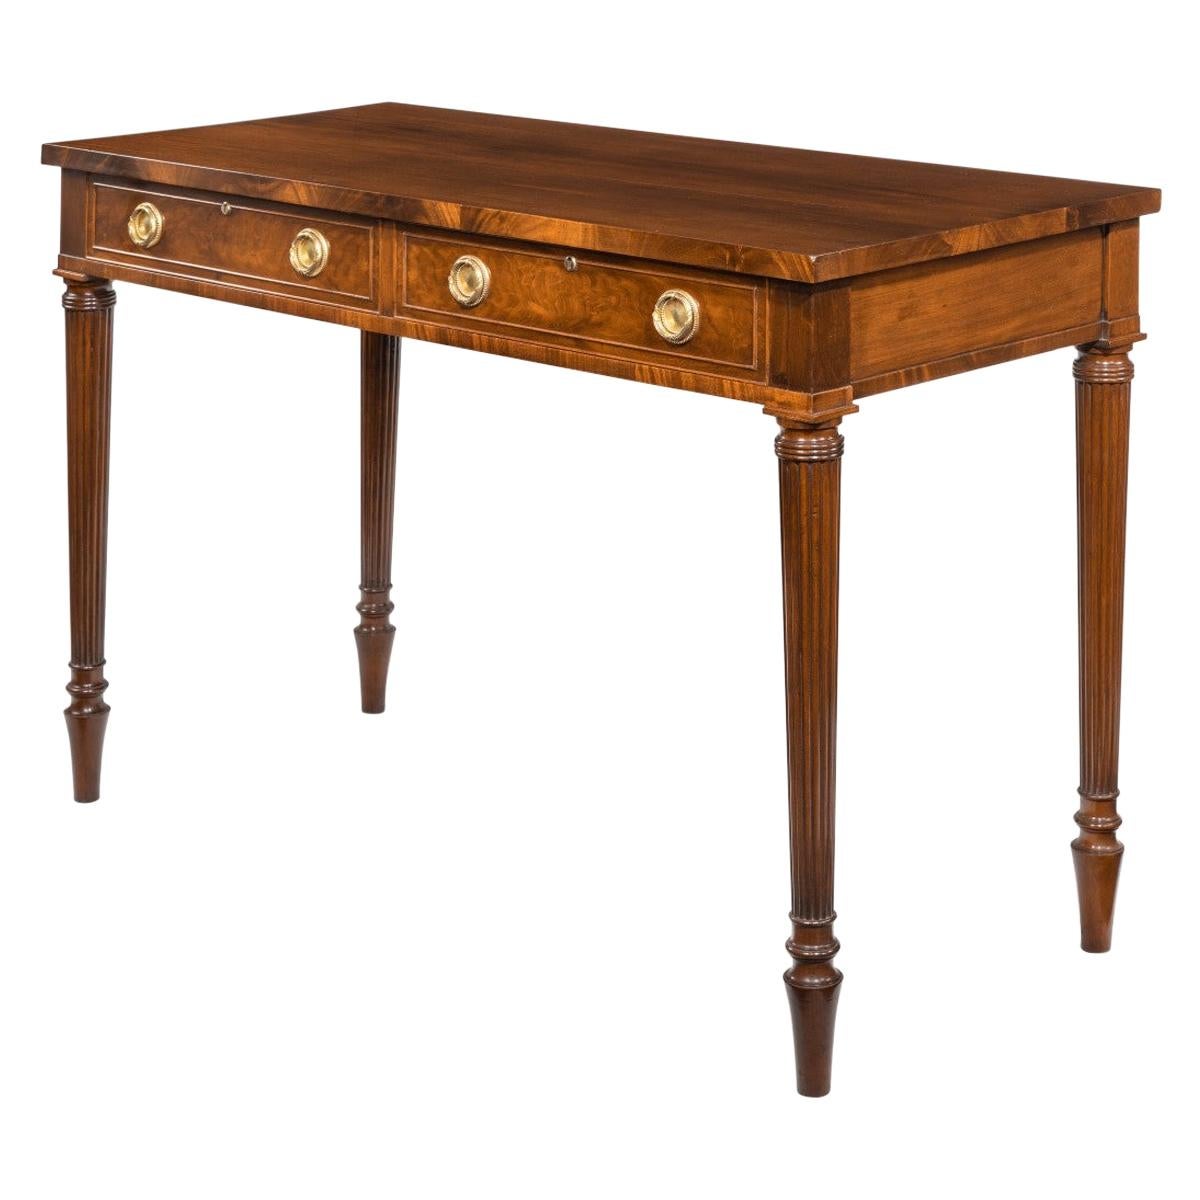 Late Victorian Mahogany Serving Table in the Regency Style